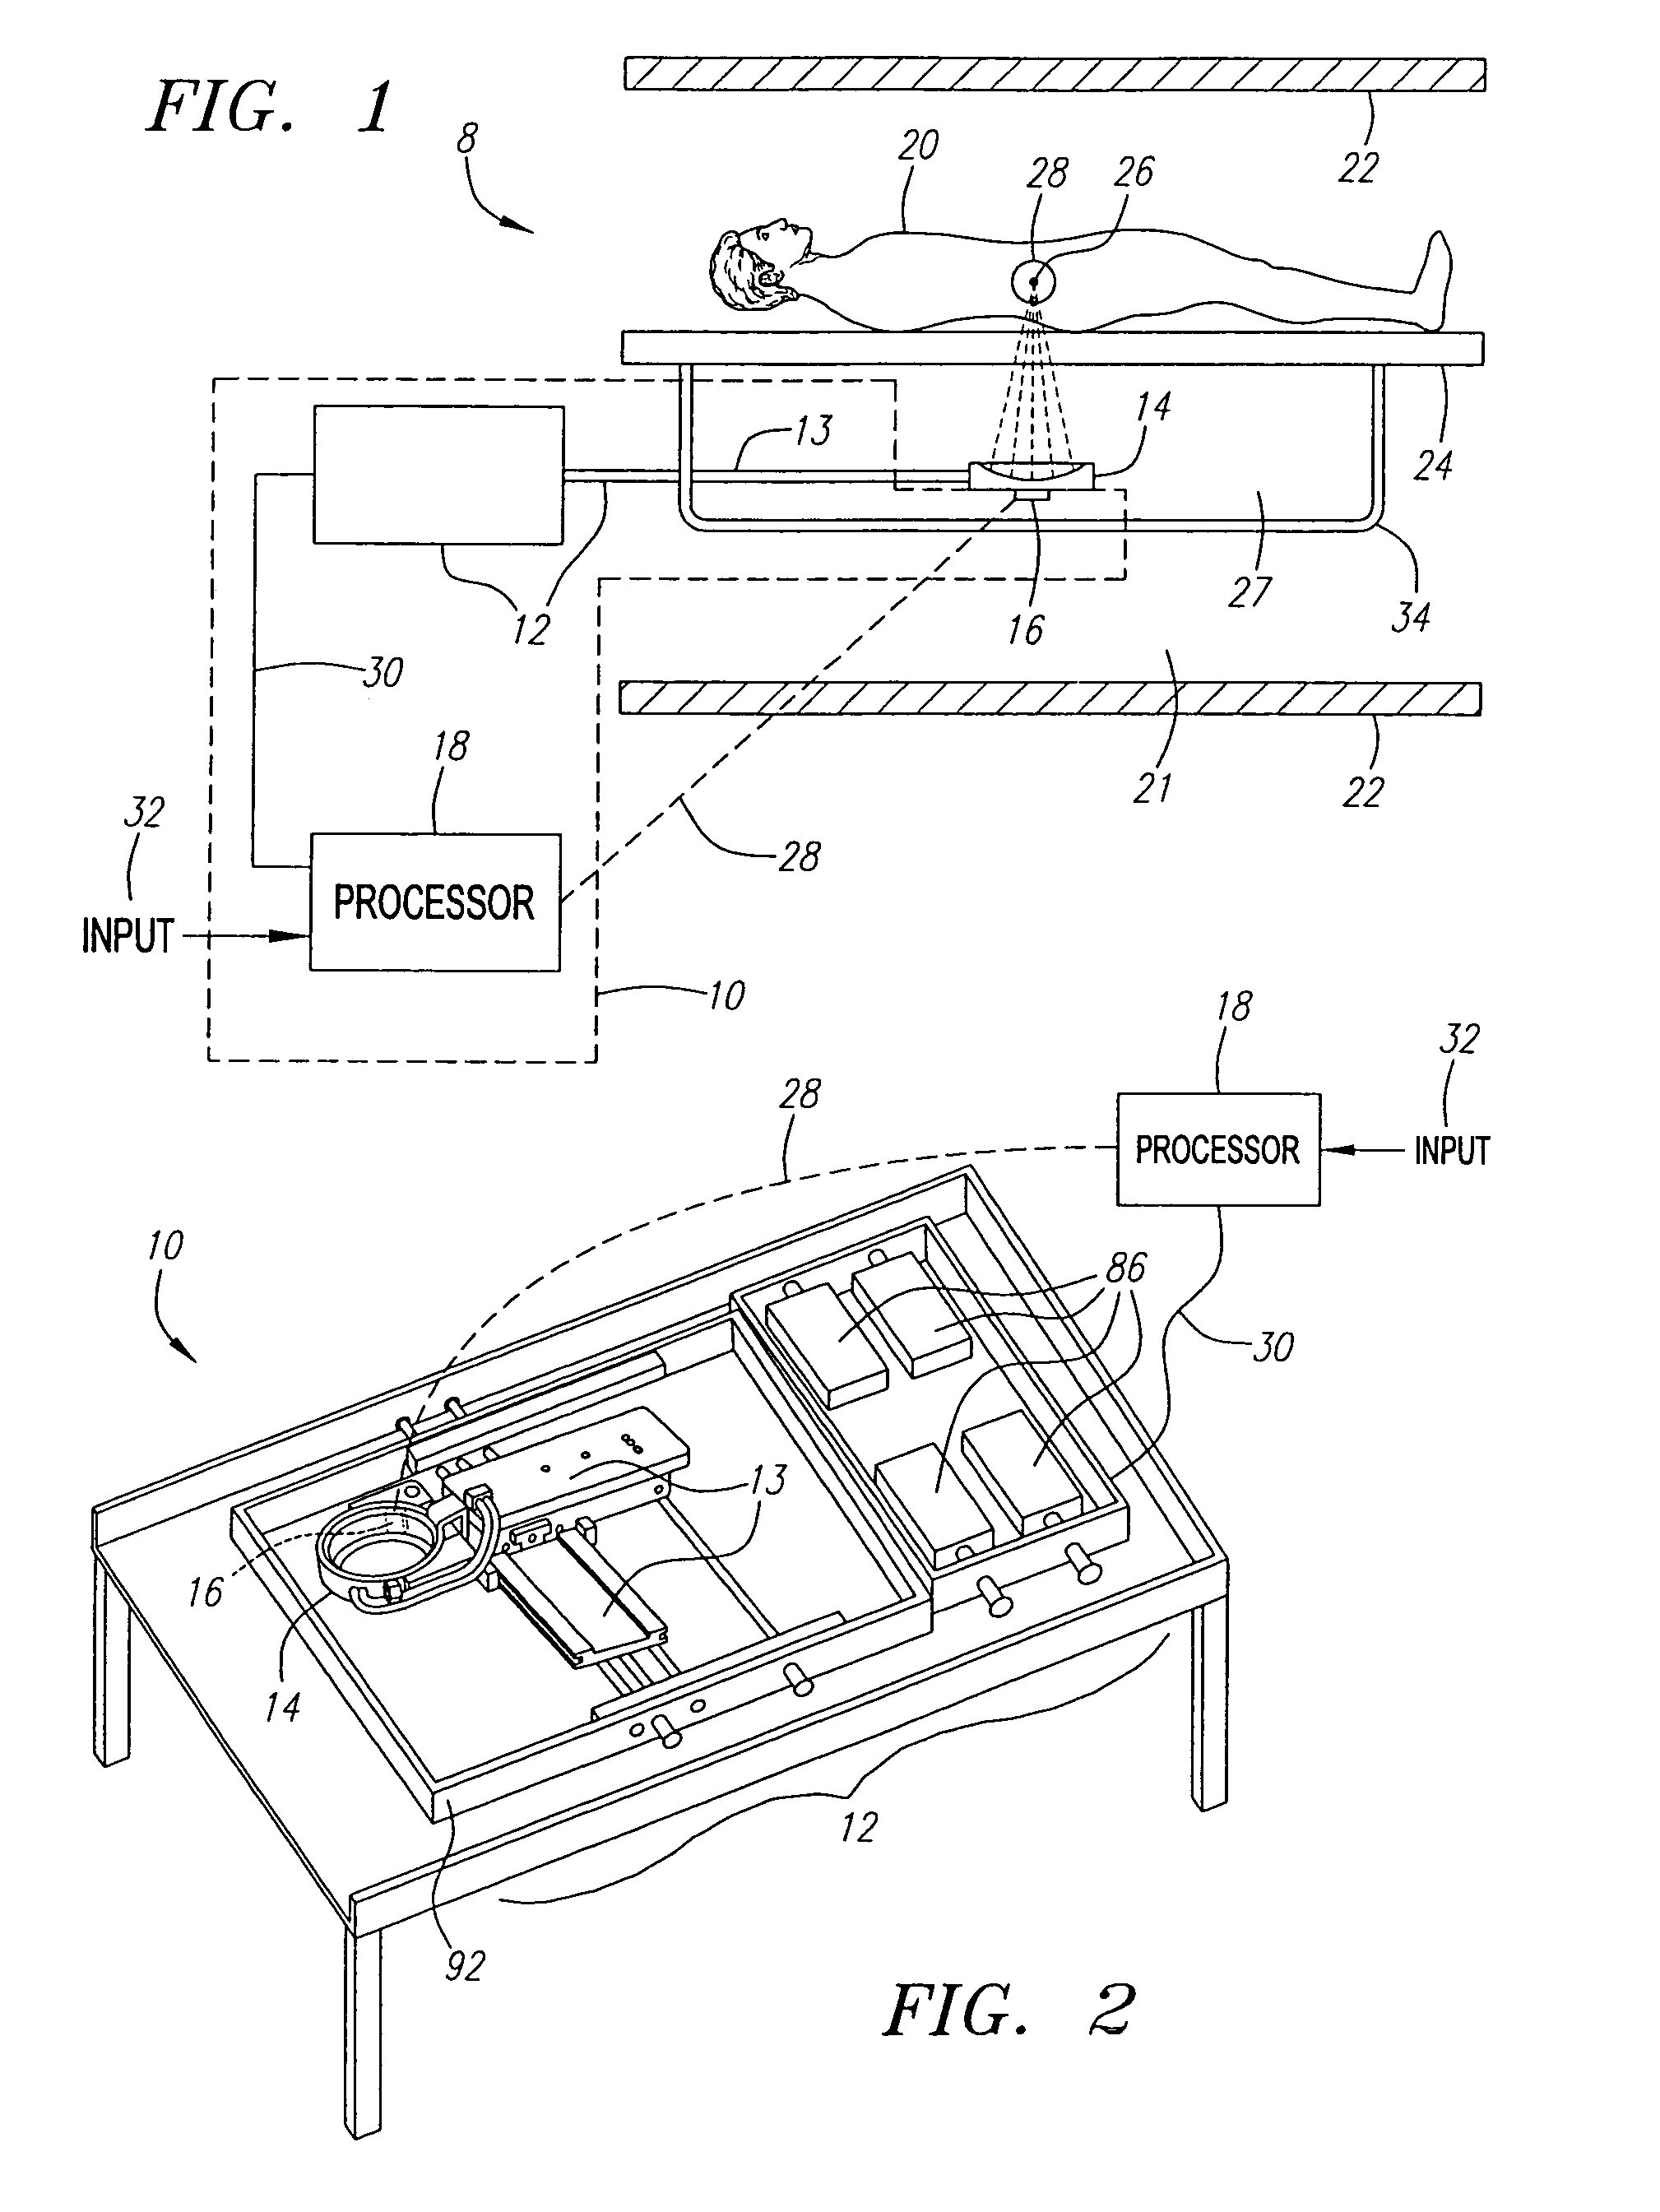 Positioning systems and methods for guided ultrasound therapy systems